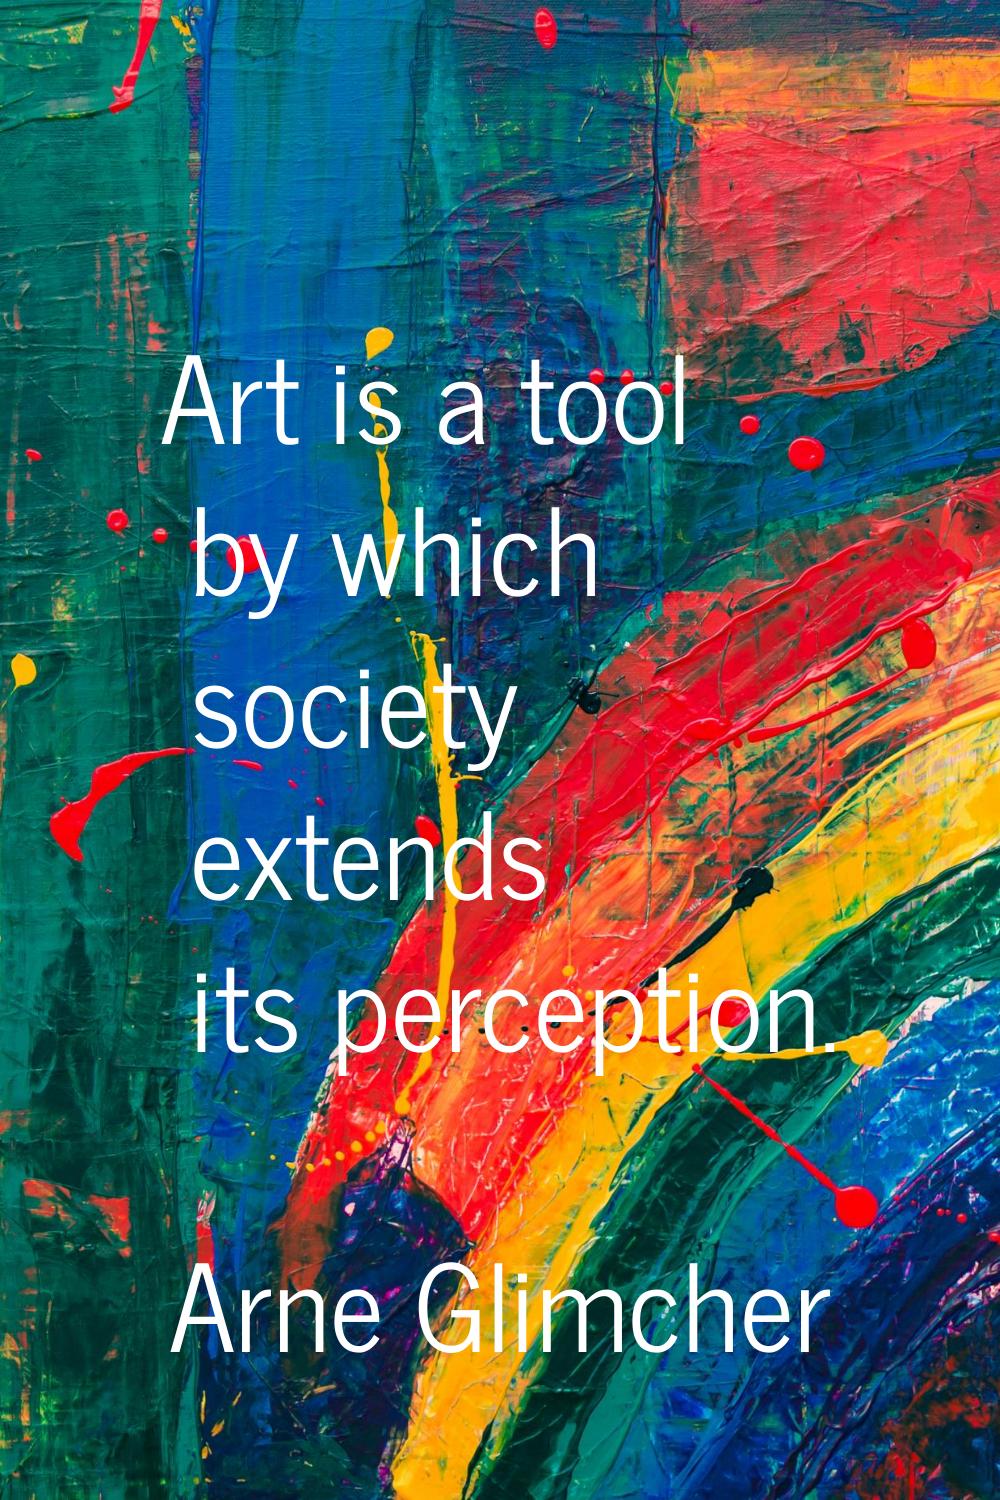 Art is a tool by which society extends its perception.